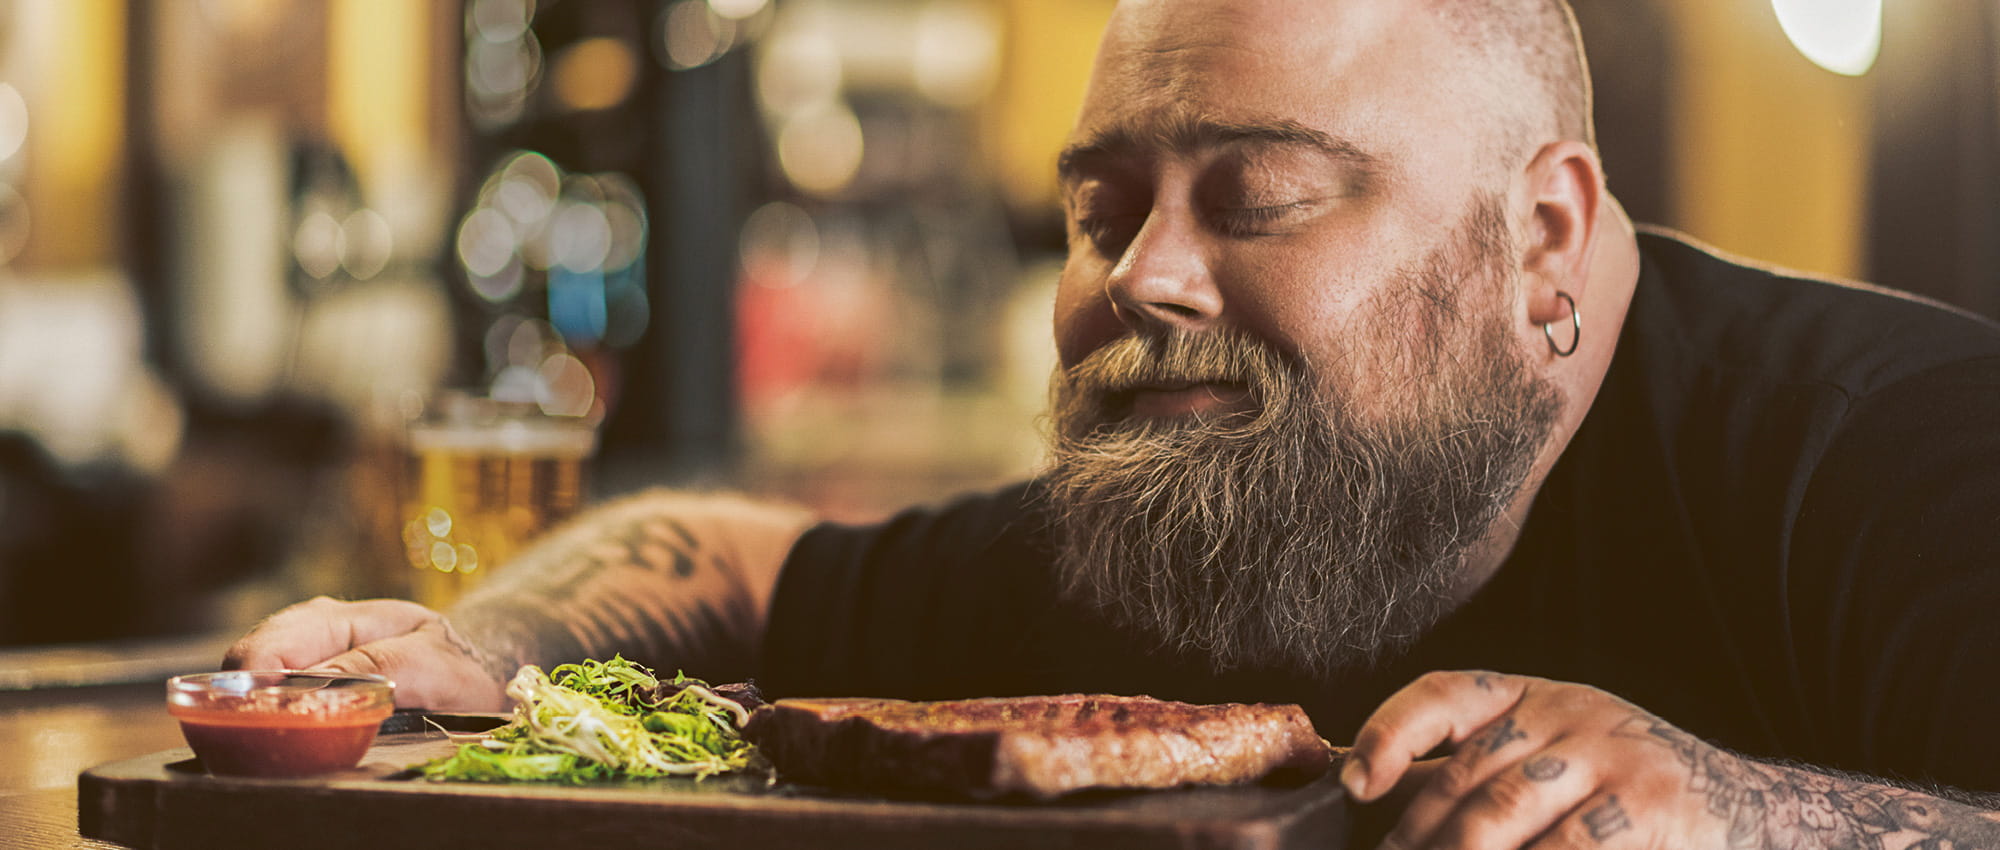 A bearded man smells a plate of food with his eyes closed. Copyright: iStock: YakobchukOlena 